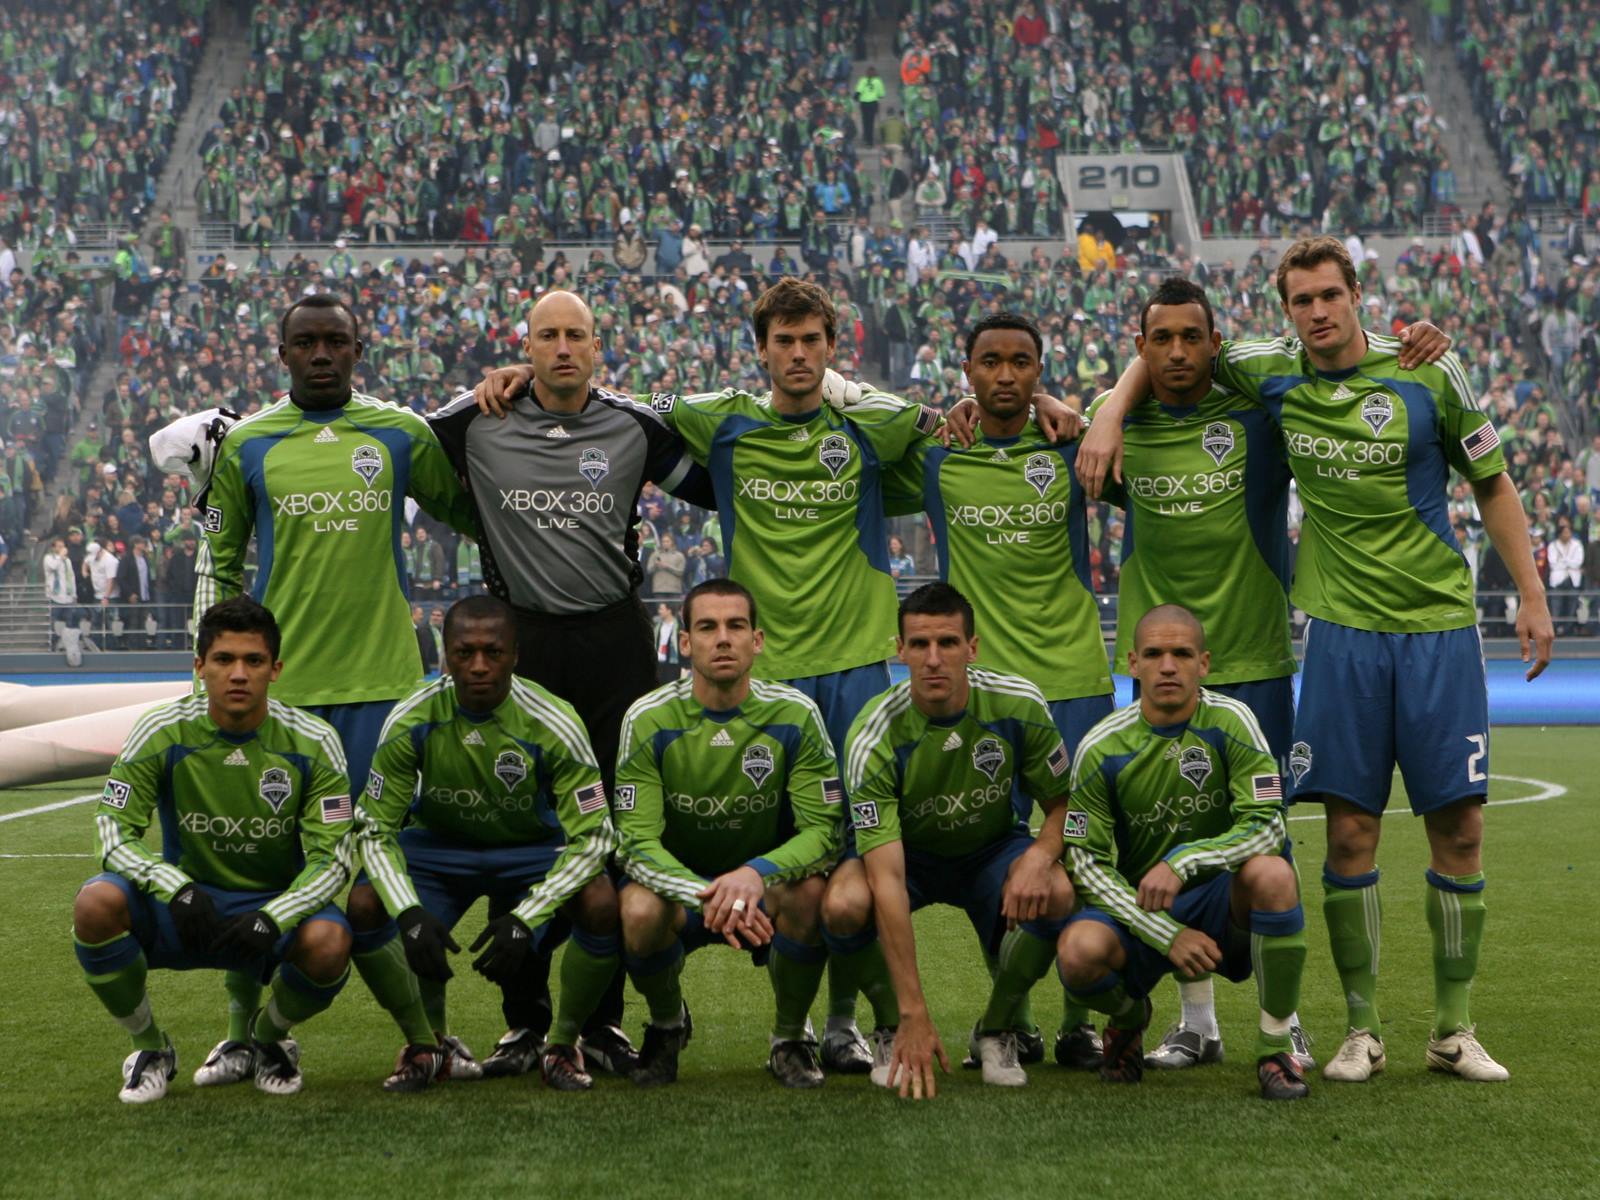 Seattle Sounders: 21 Football Club Facts - Facts.net